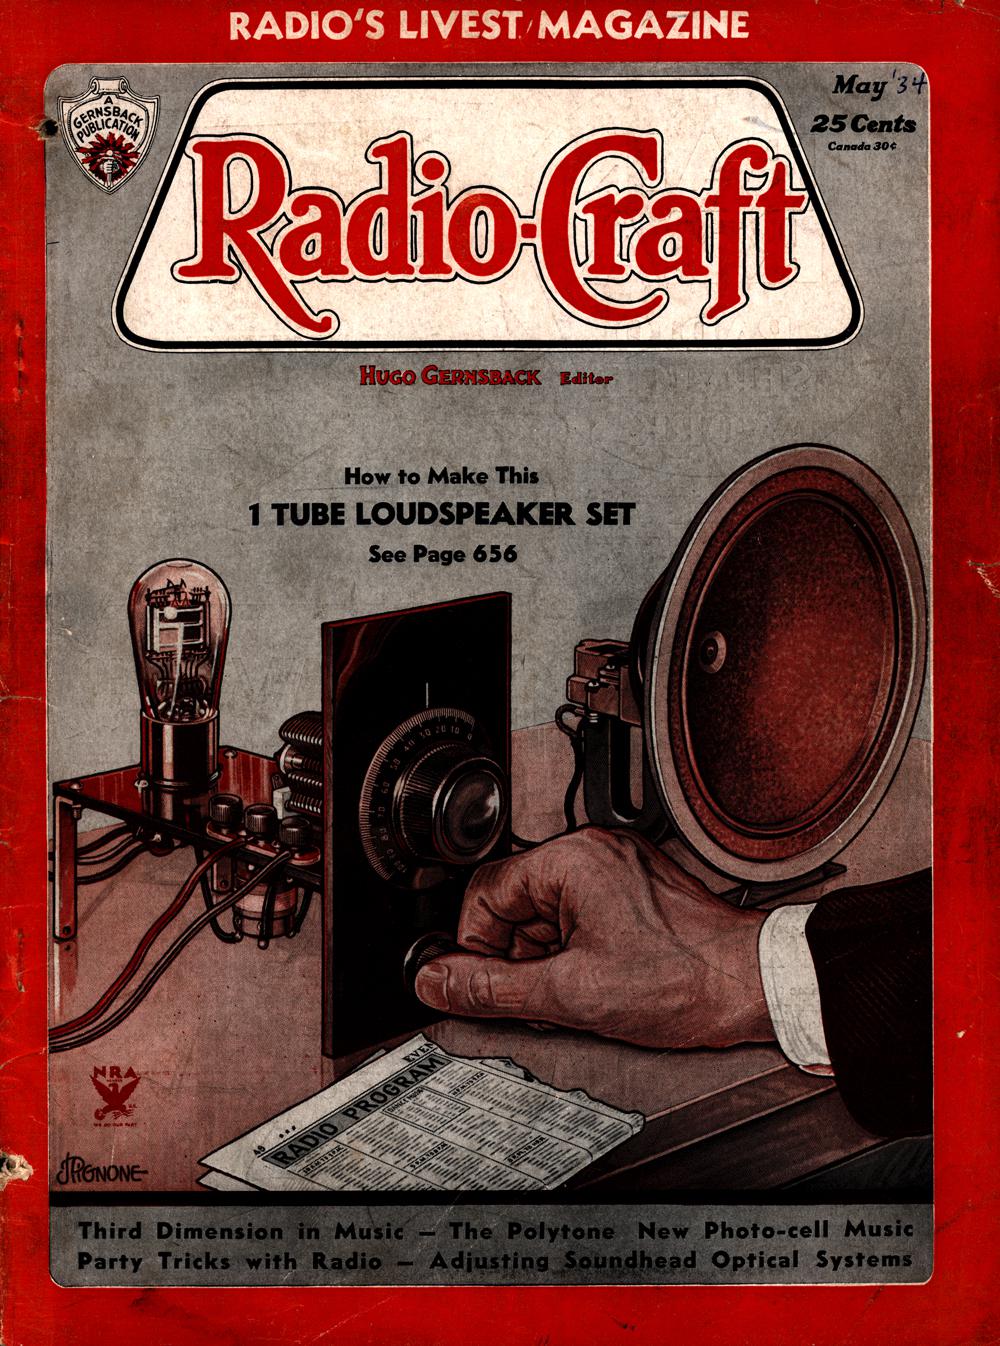 1934 - Radio-craft. and popular electronics; radio-electronics in all its phases - Vol. 5, No. 11